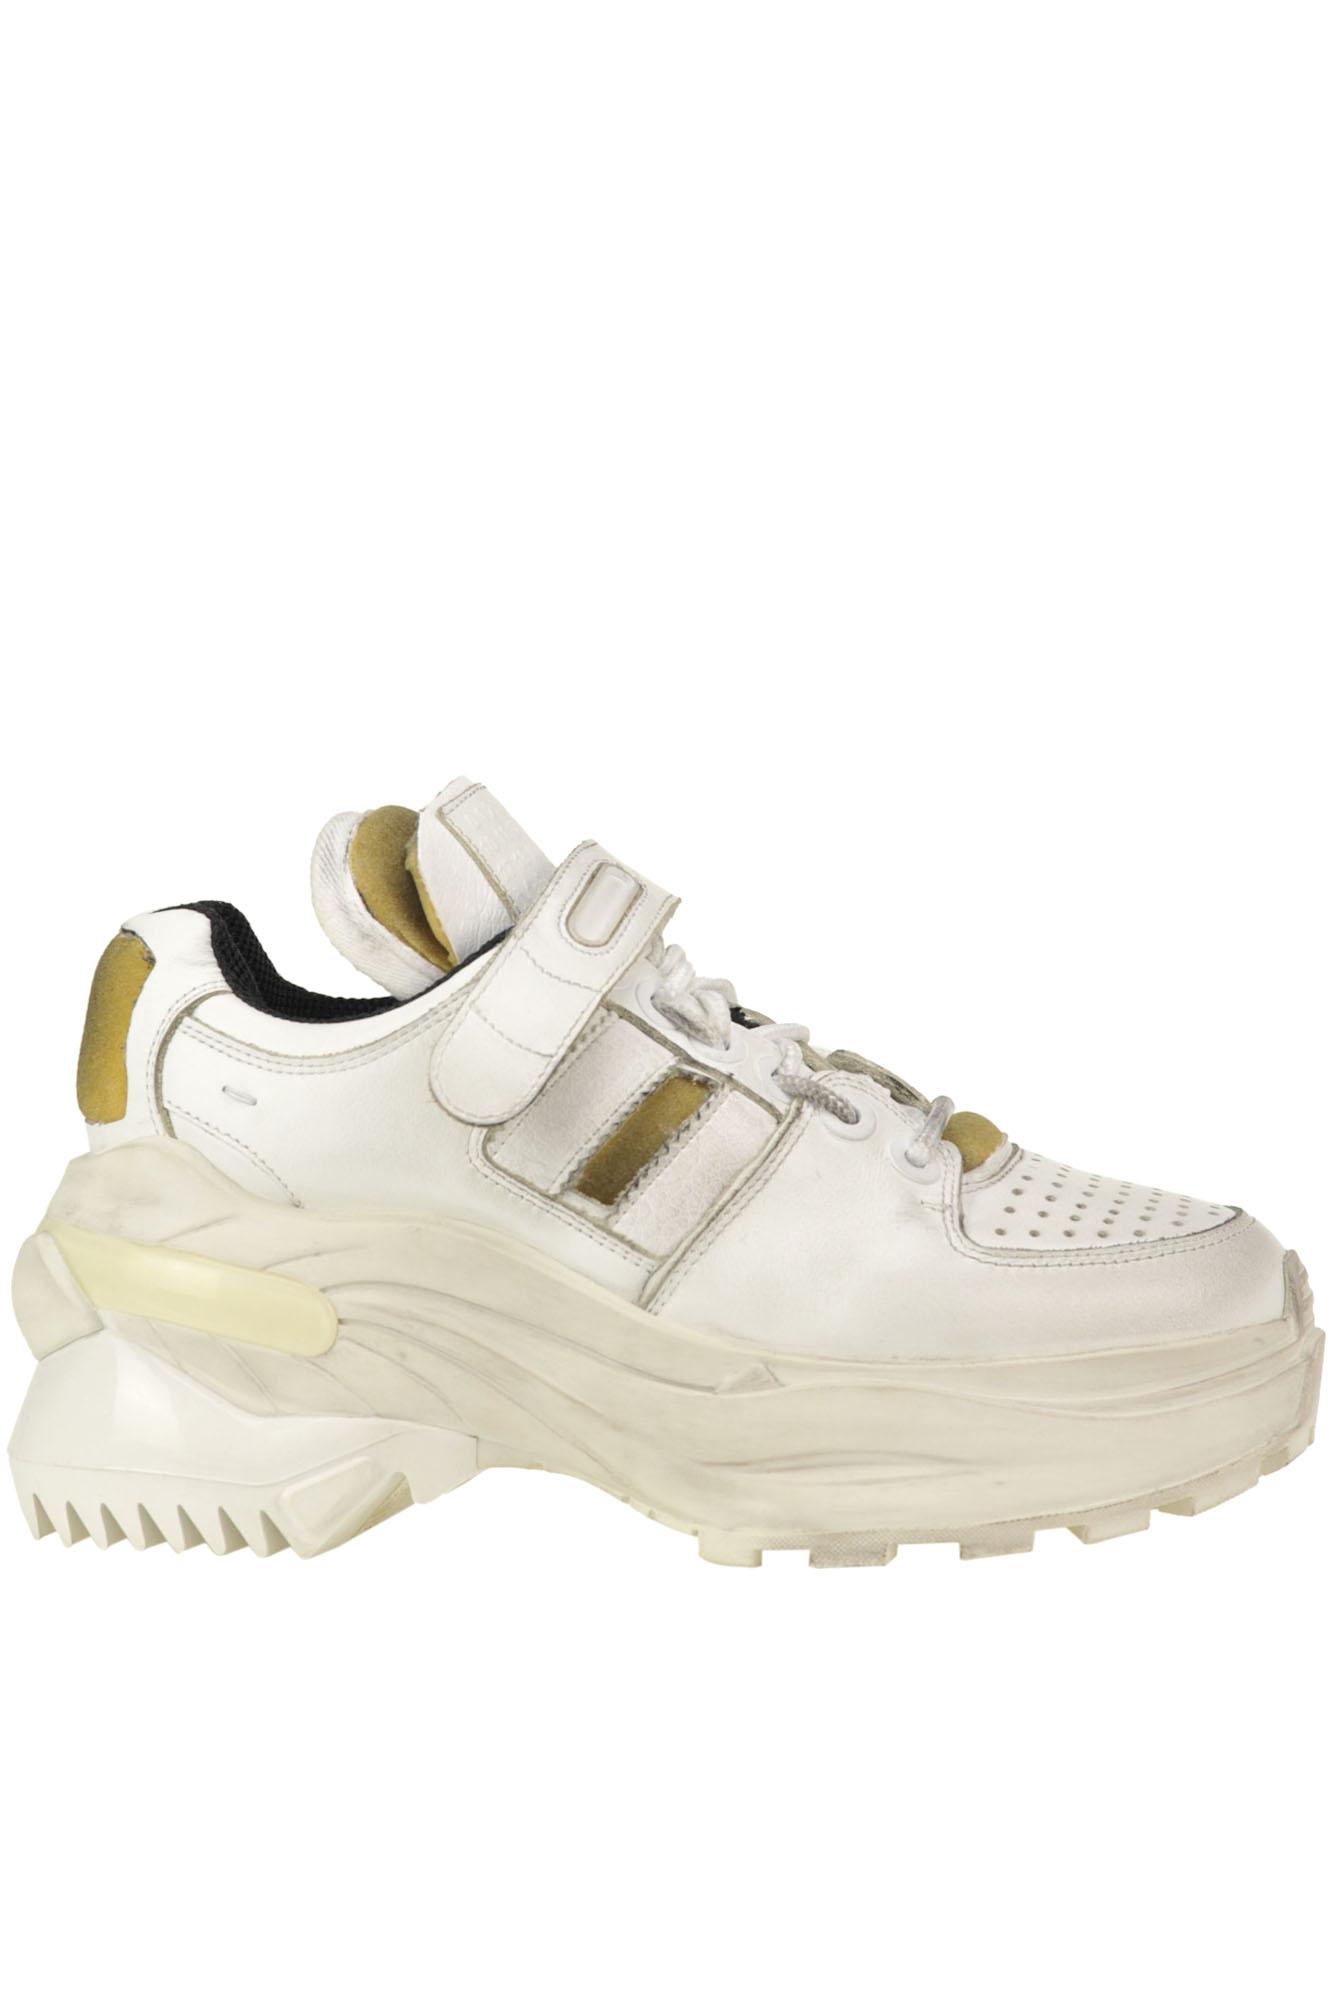 Maison Margiela Destroyed Leather Dad Sneakers in White - Lyst